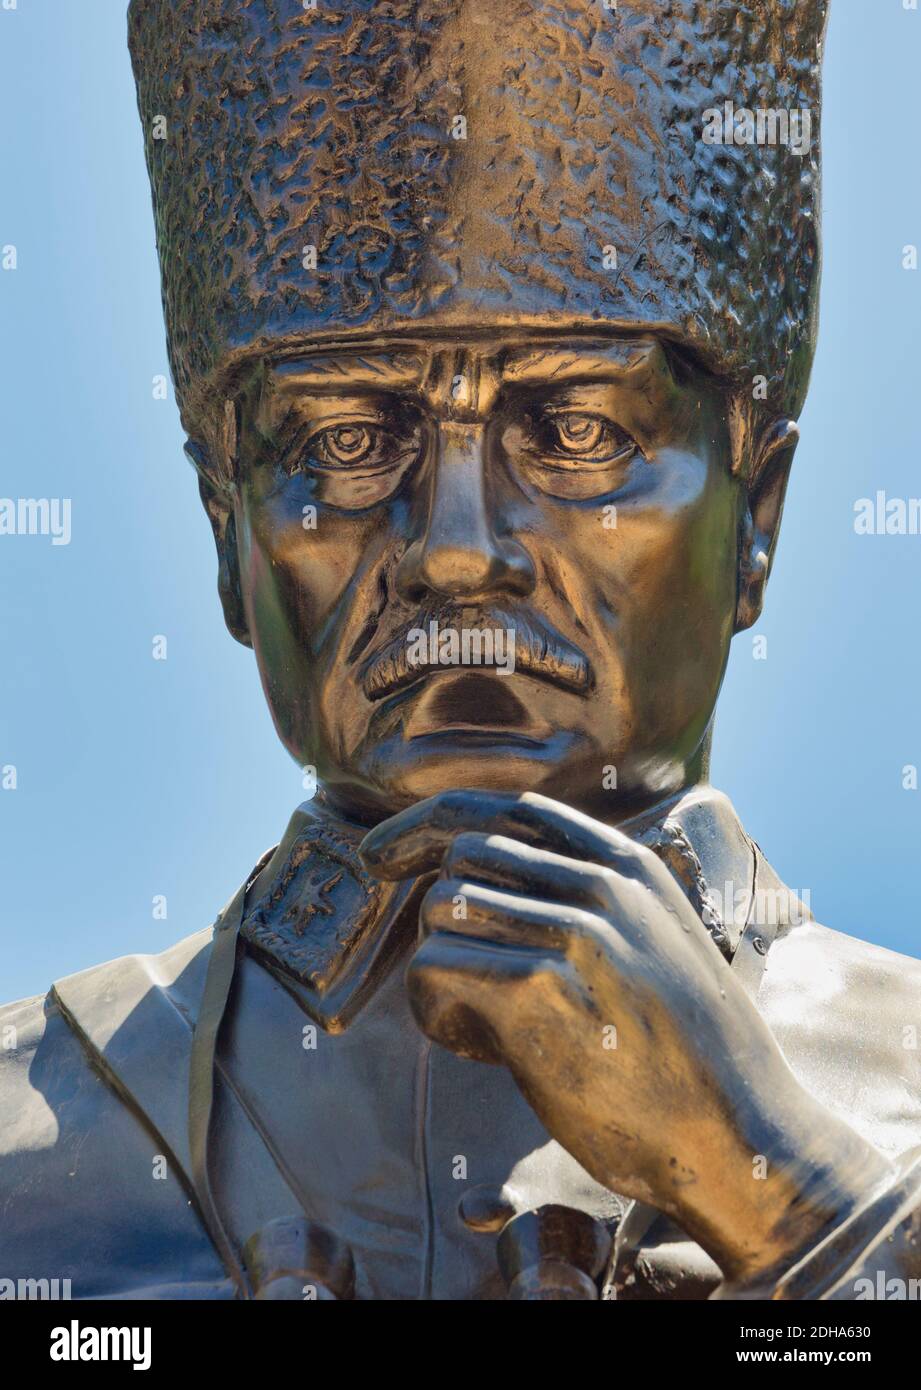 Bust of Ataturk in the square at Kosk, Aydin Province, Turkey.  Mustafa Kemal Ataturk, 1881 to 1938.  Founder of the Republic of Turkey and first pres Stock Photo